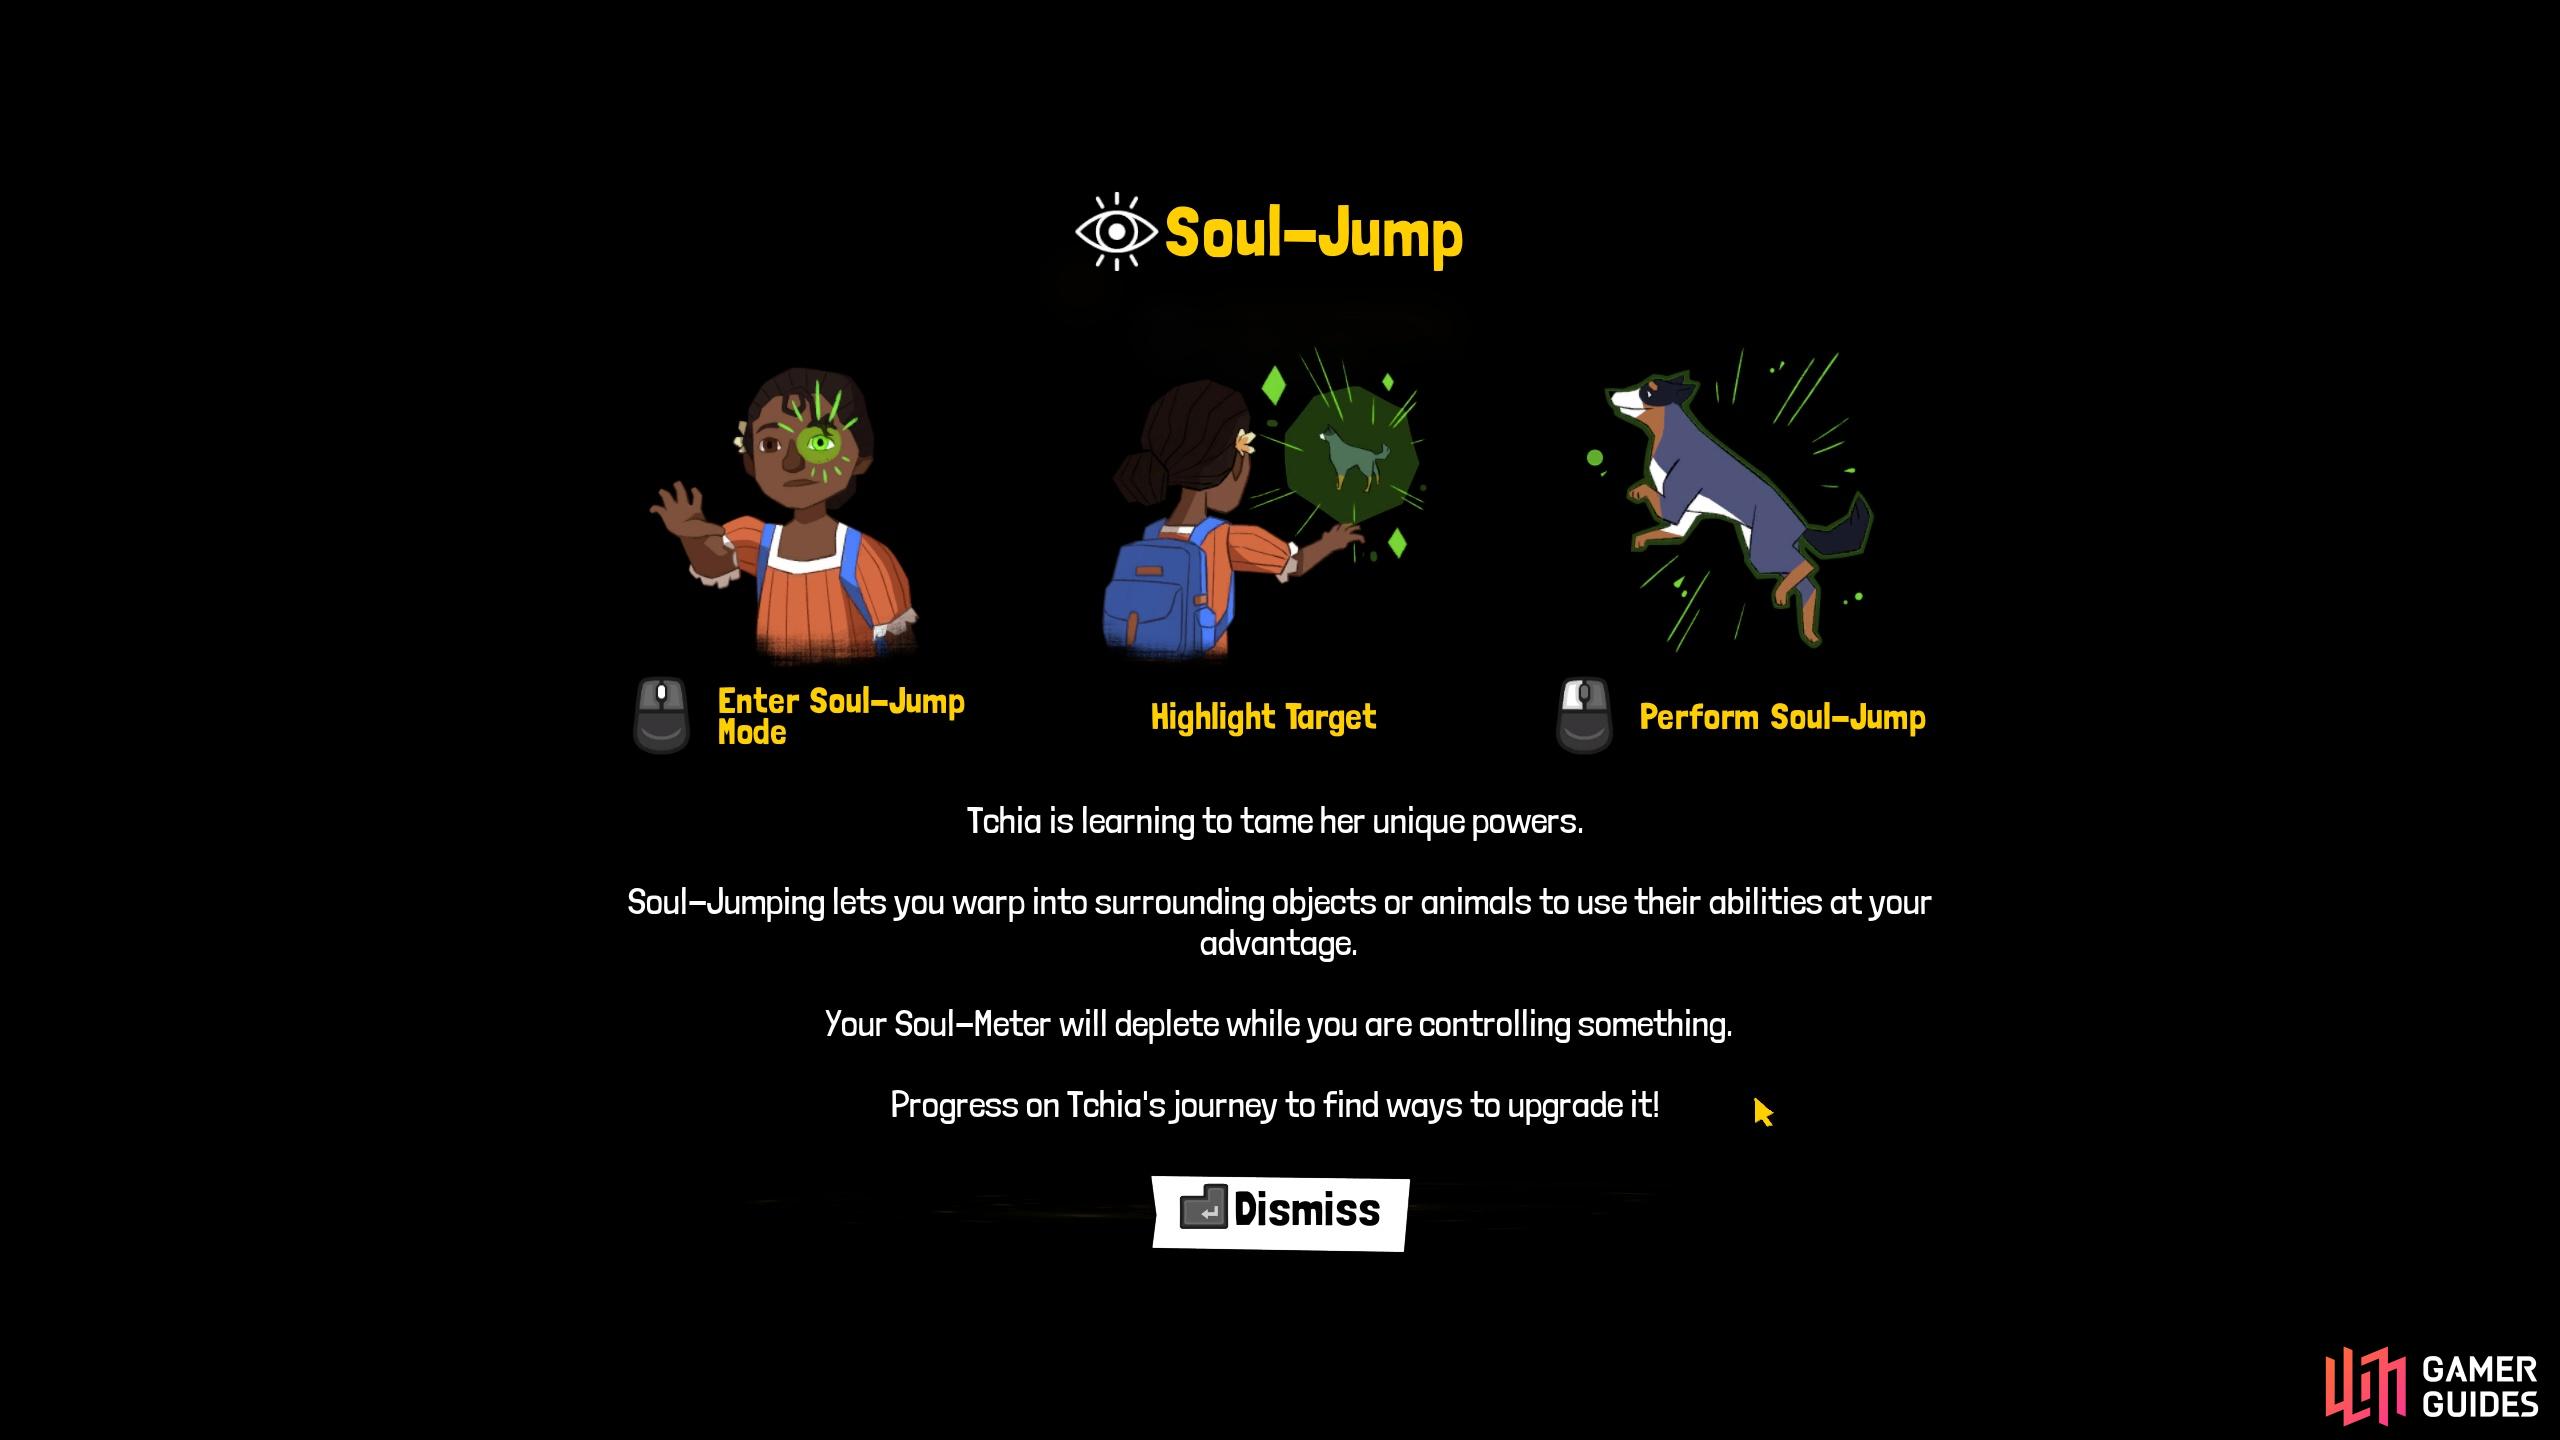 You’ve now unlocked soul jumping!